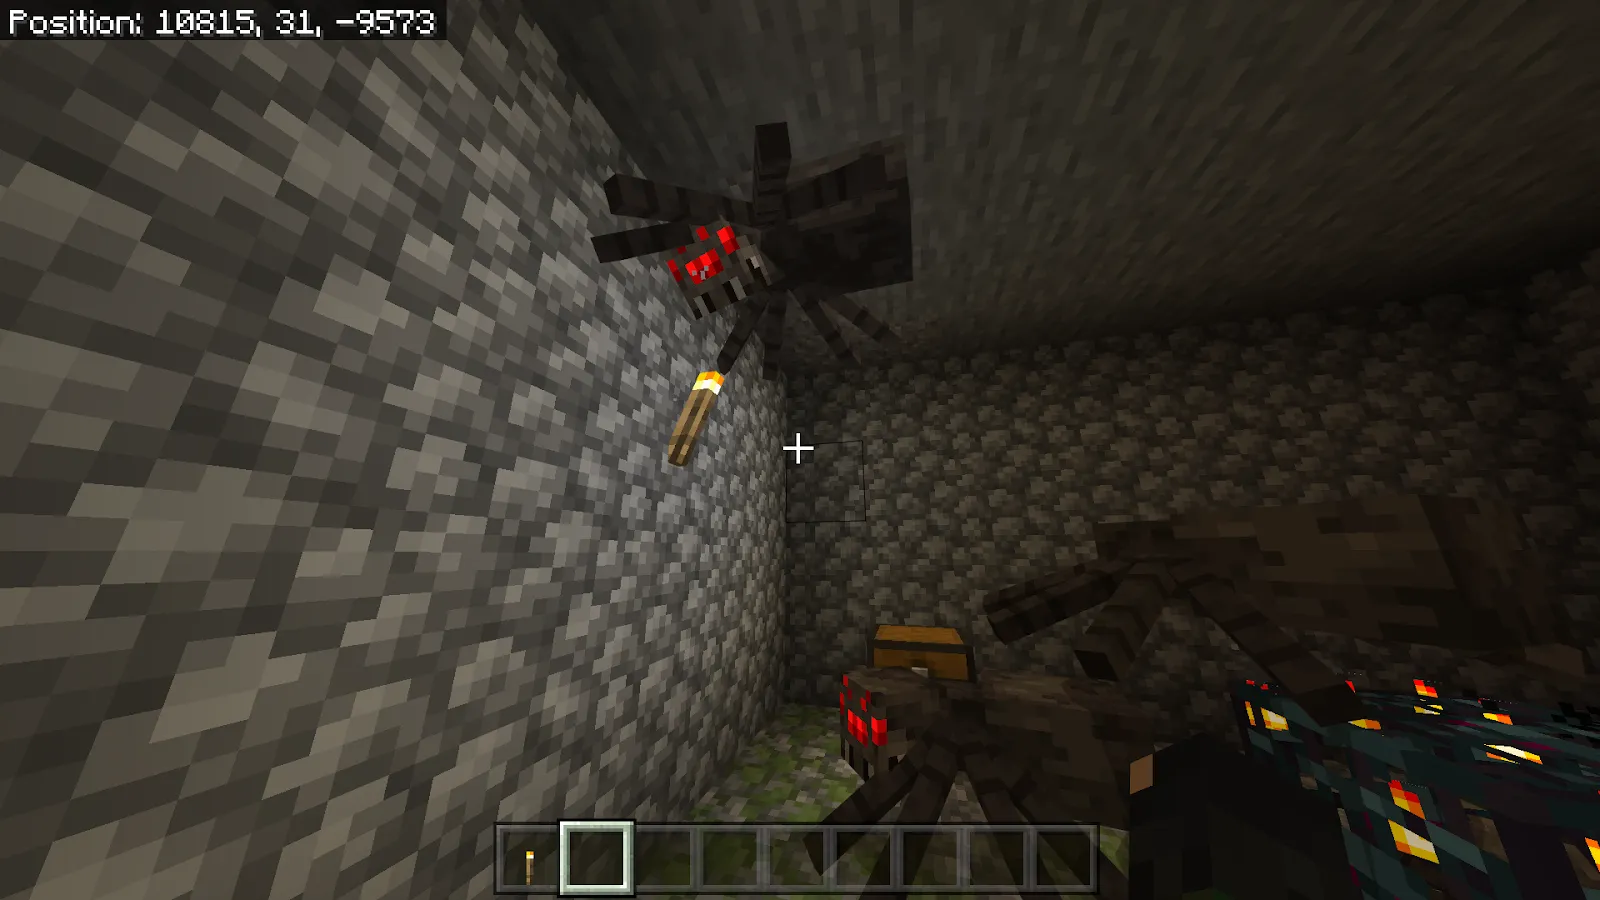 An image of a spider on the wall in Minecraft